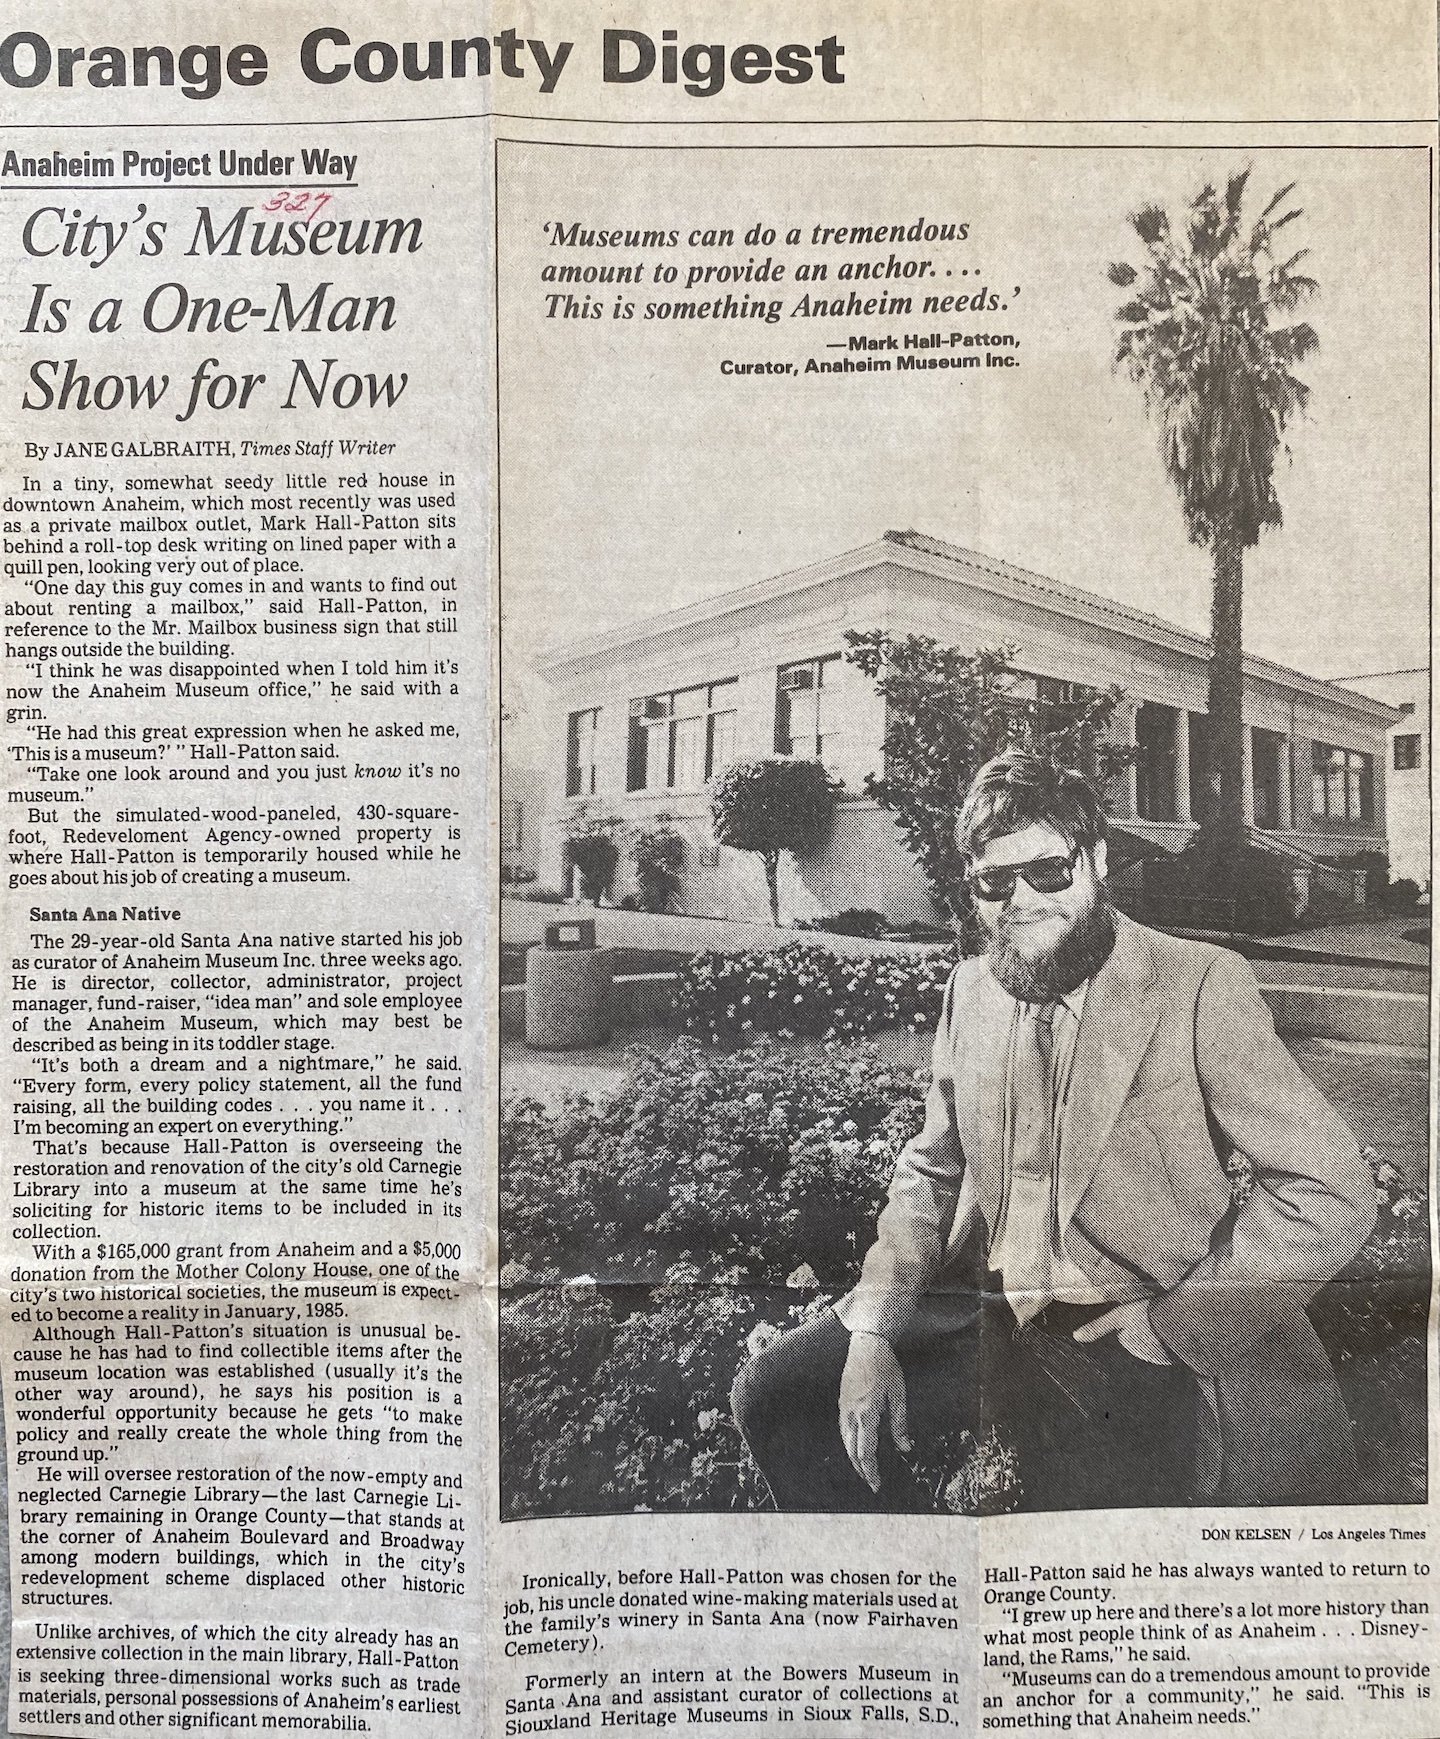  First museum employee, Mark Hall-Patton.  Los Angeles Times , March 26, 1984. 